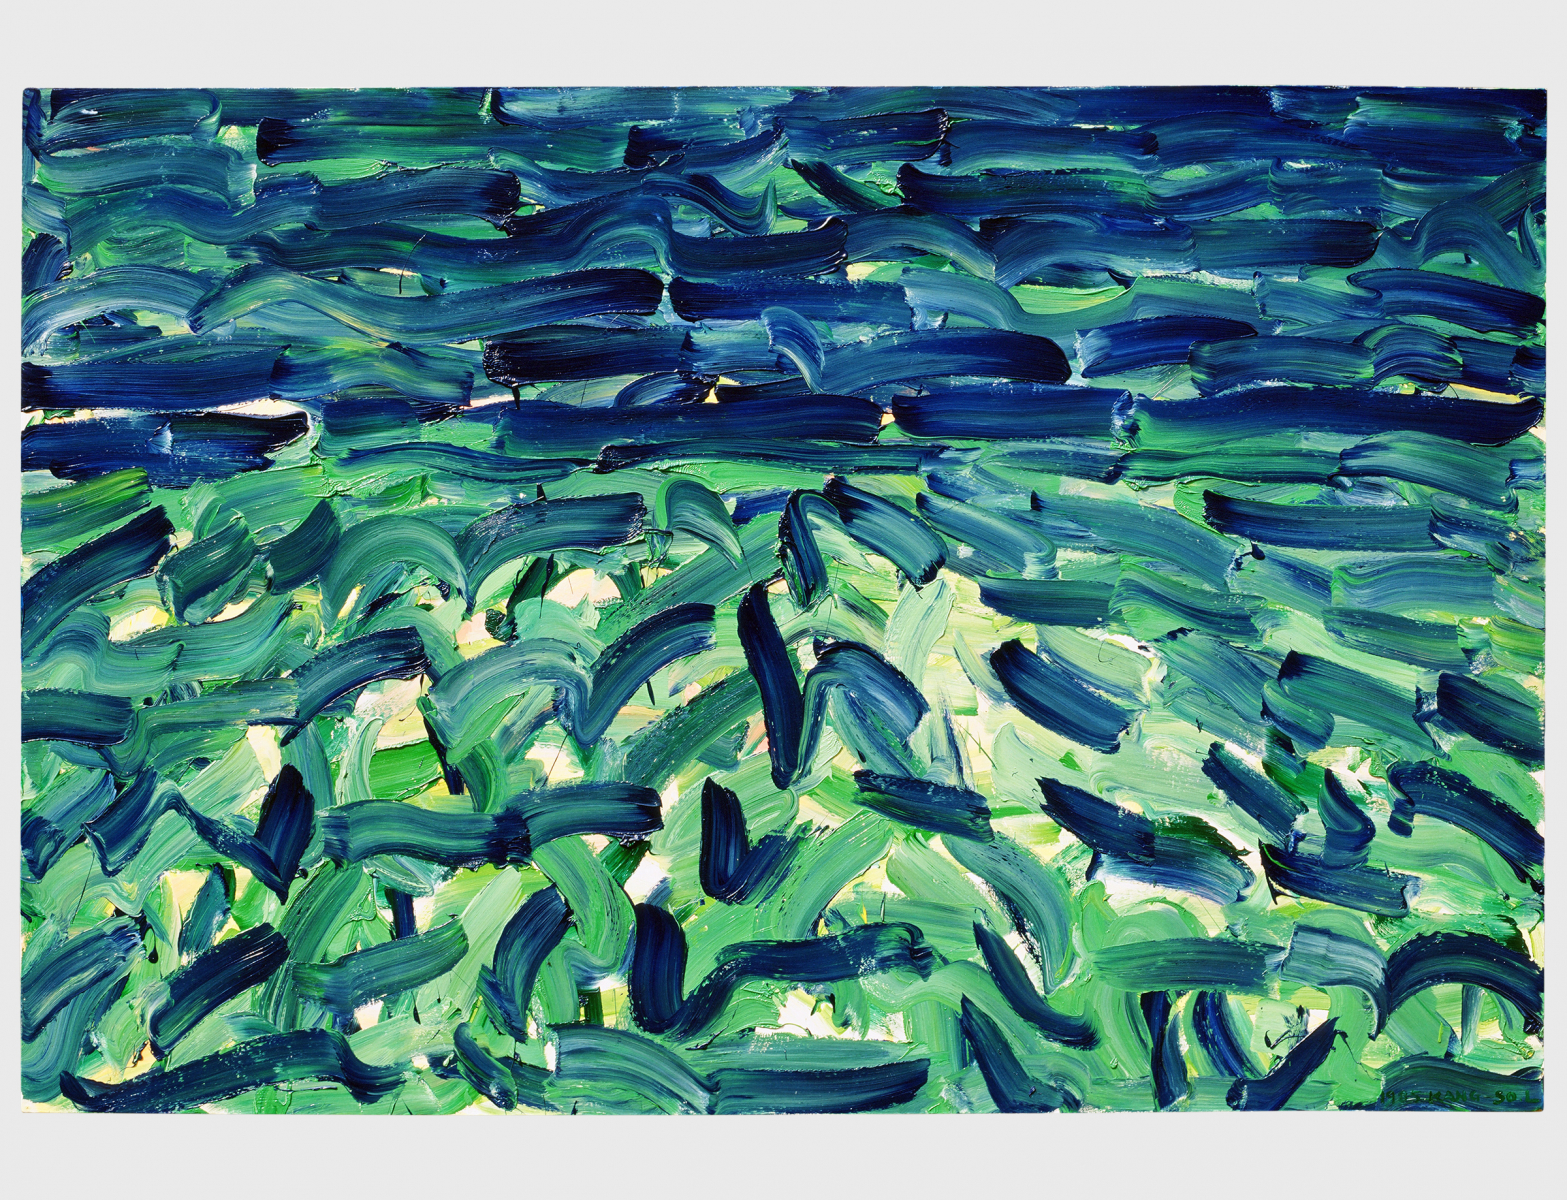 Untitled-85026, 1985, Oil on Canvas, 130.7x194cm